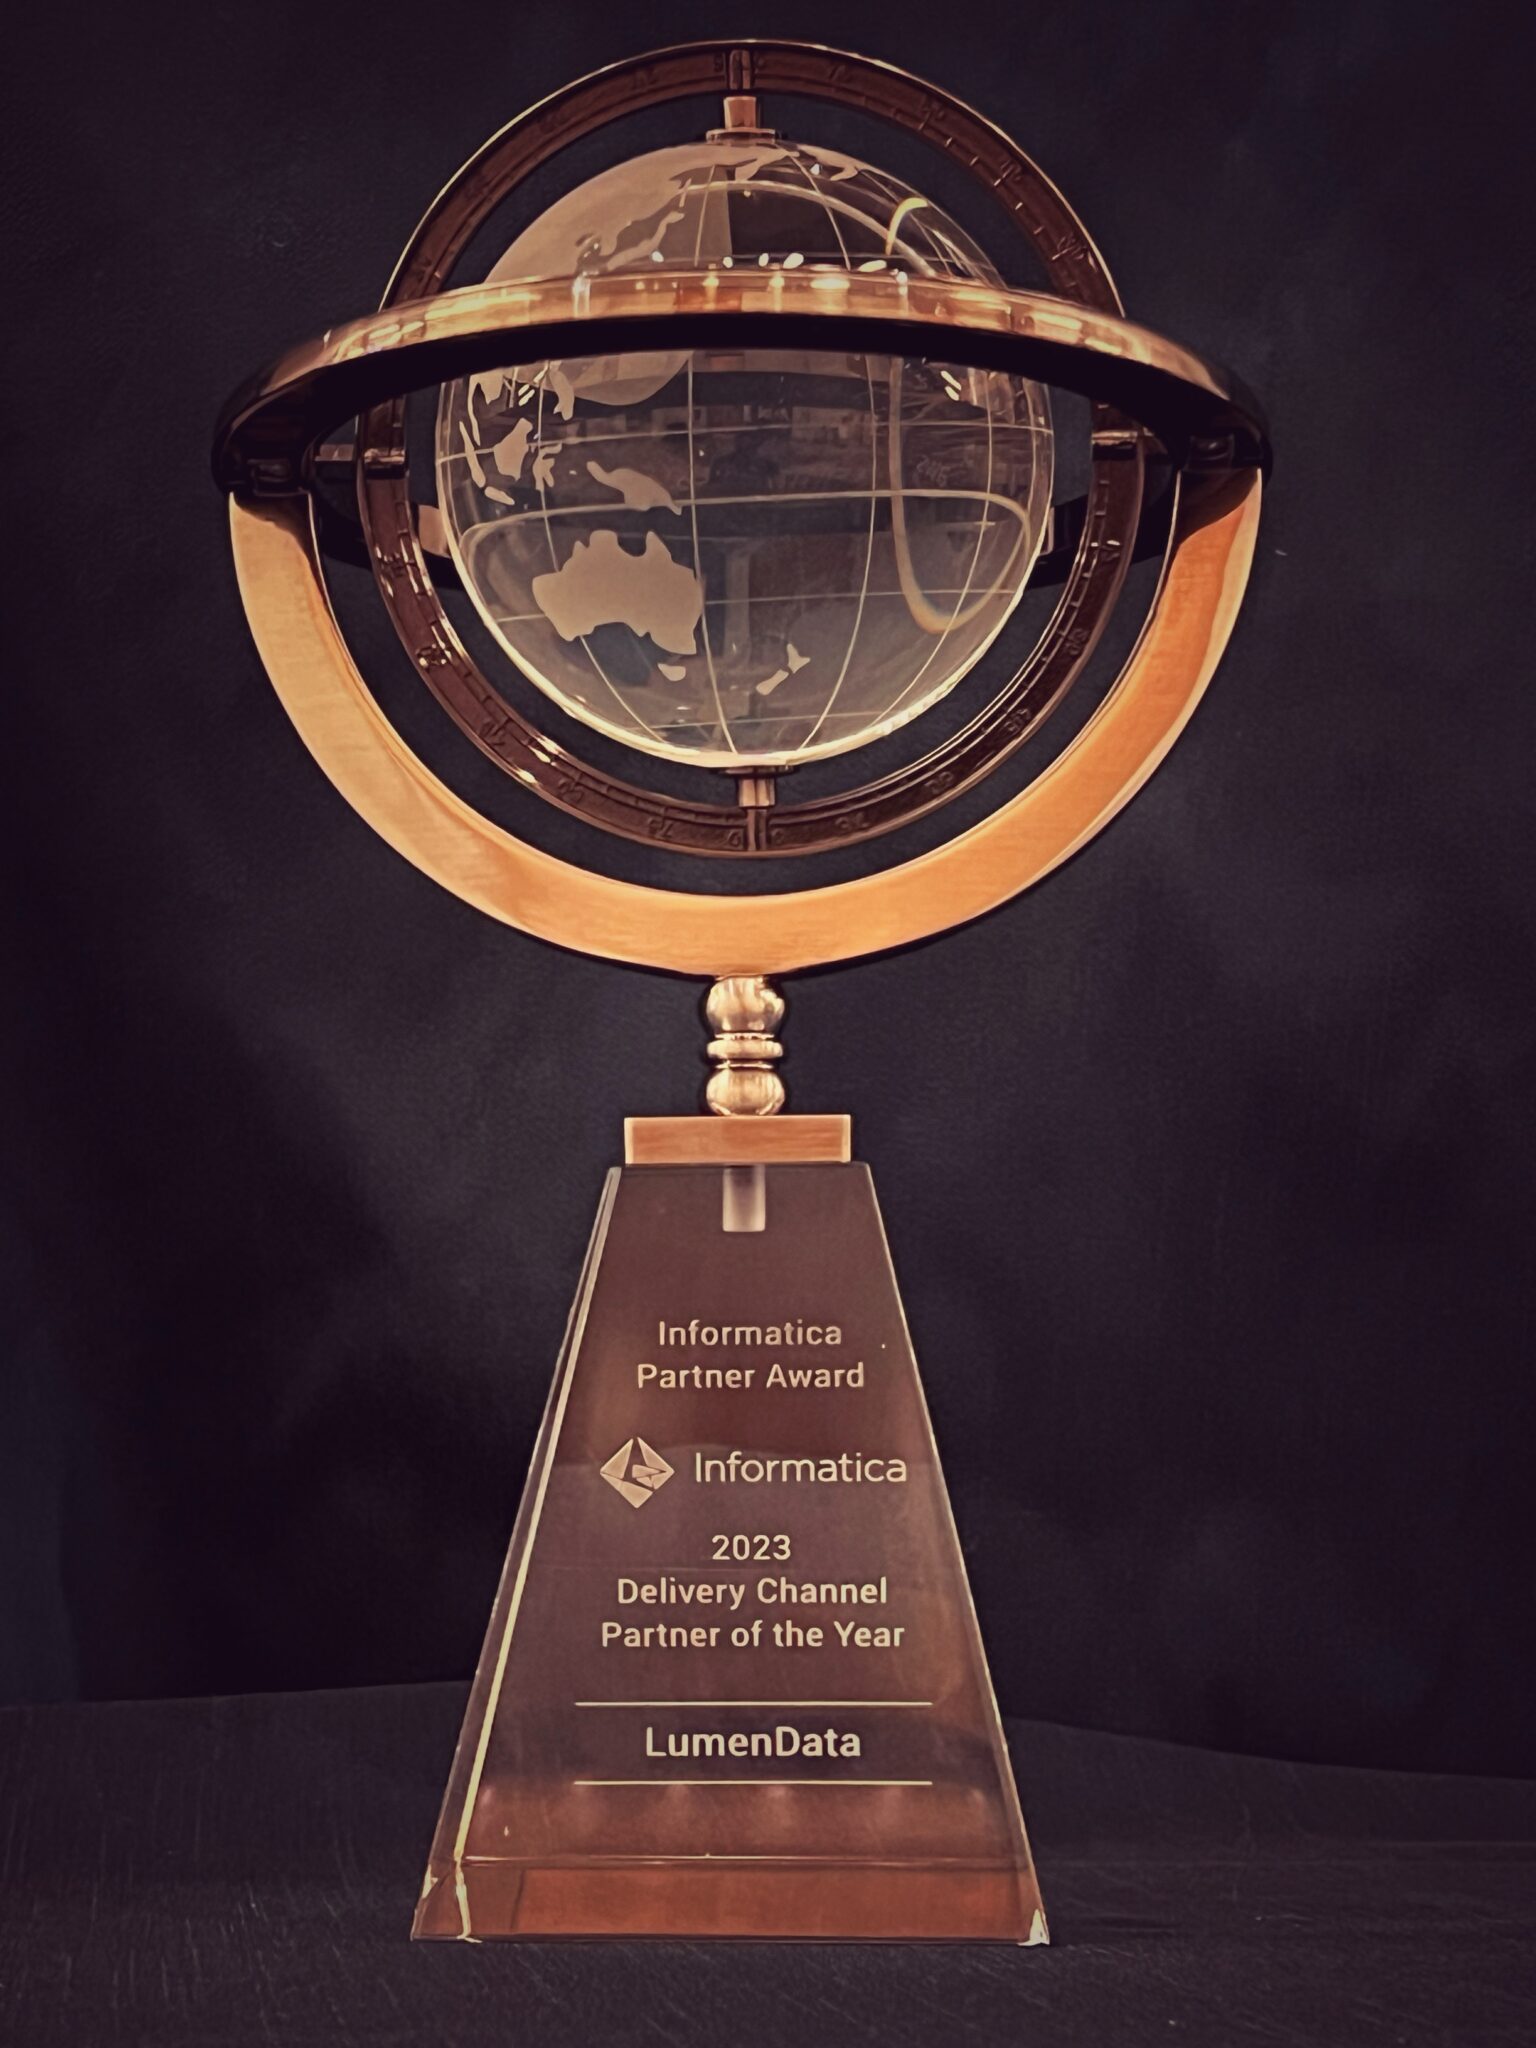 LumenData wins the 2023 Global ‘Delivery Channel Partner of the Year’ Award by Informatica